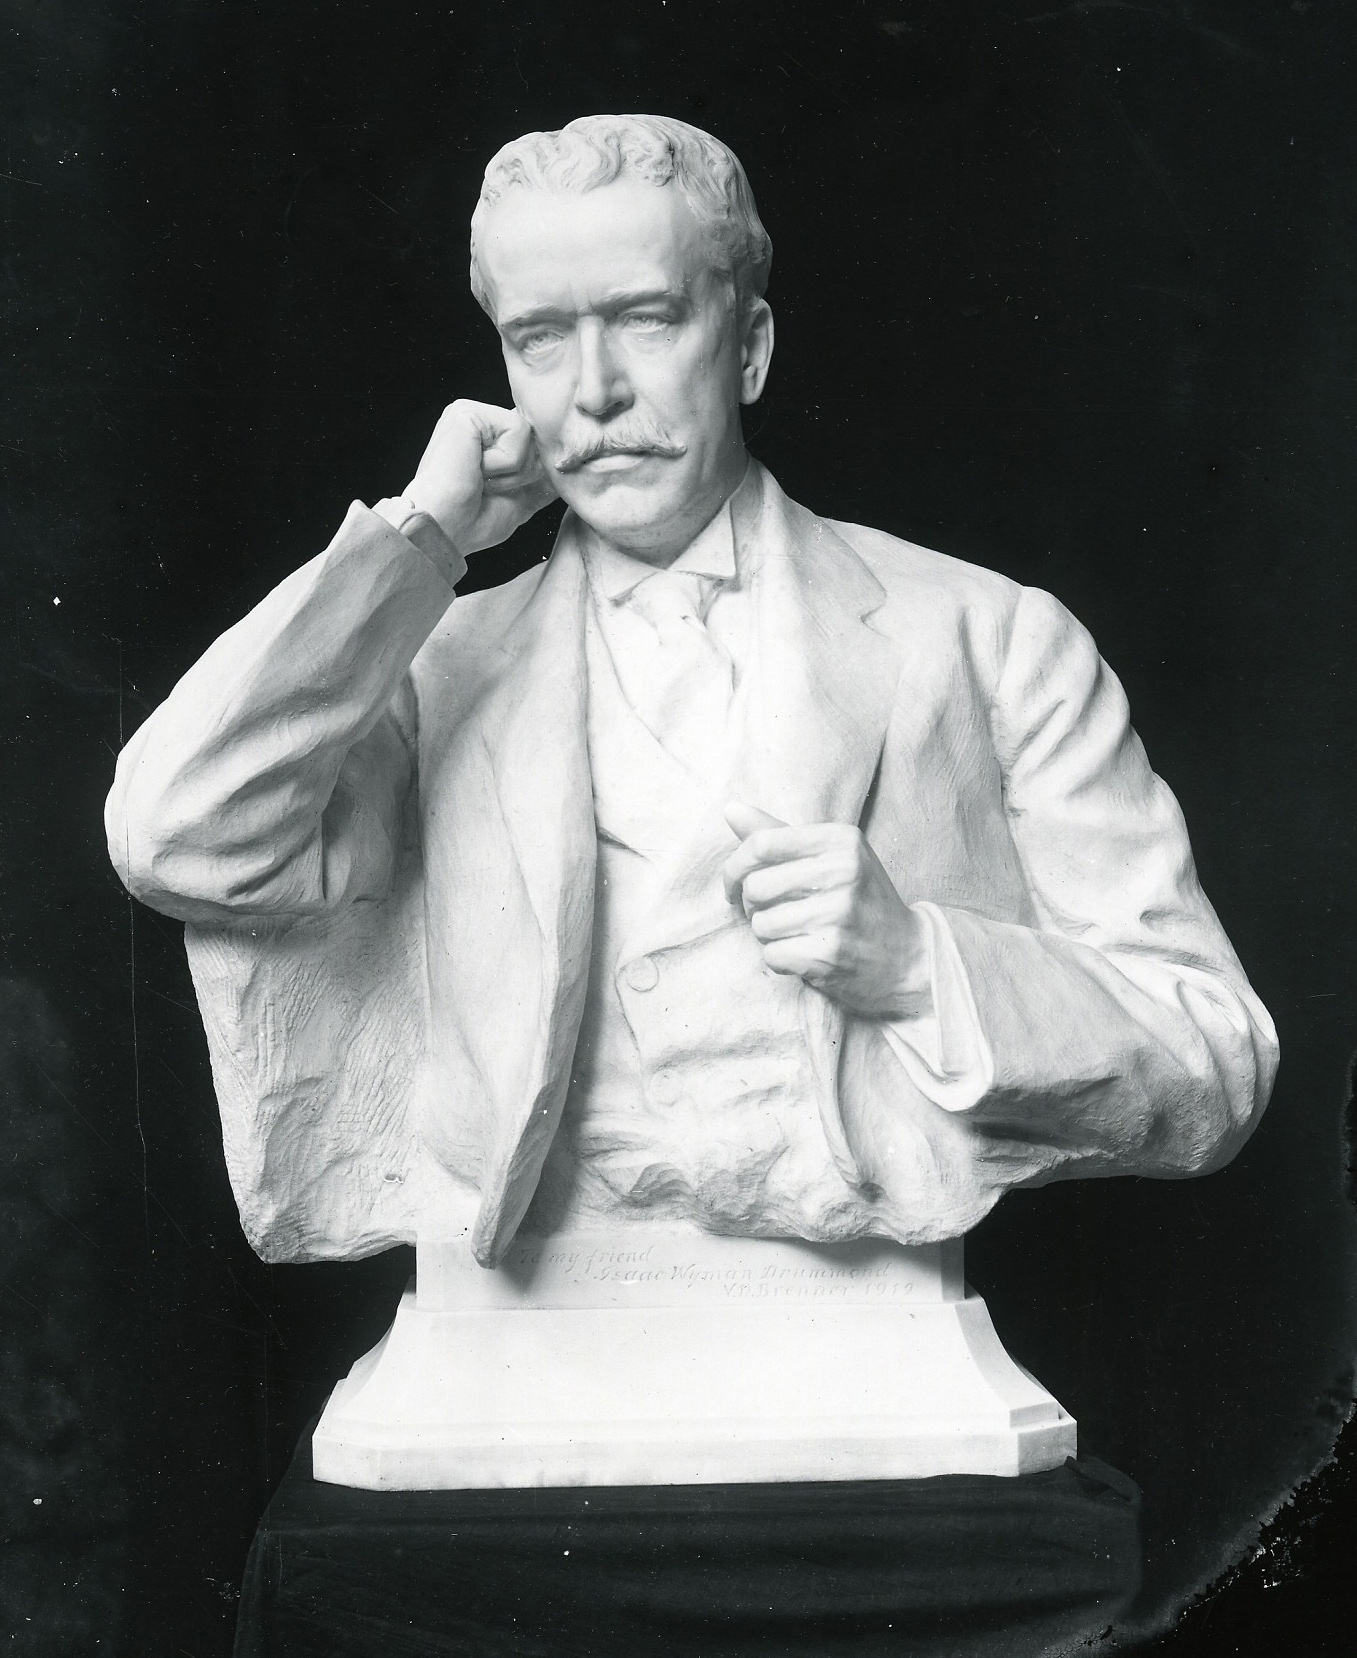 Hahlo-148, Dr. I.W. Drummond bust